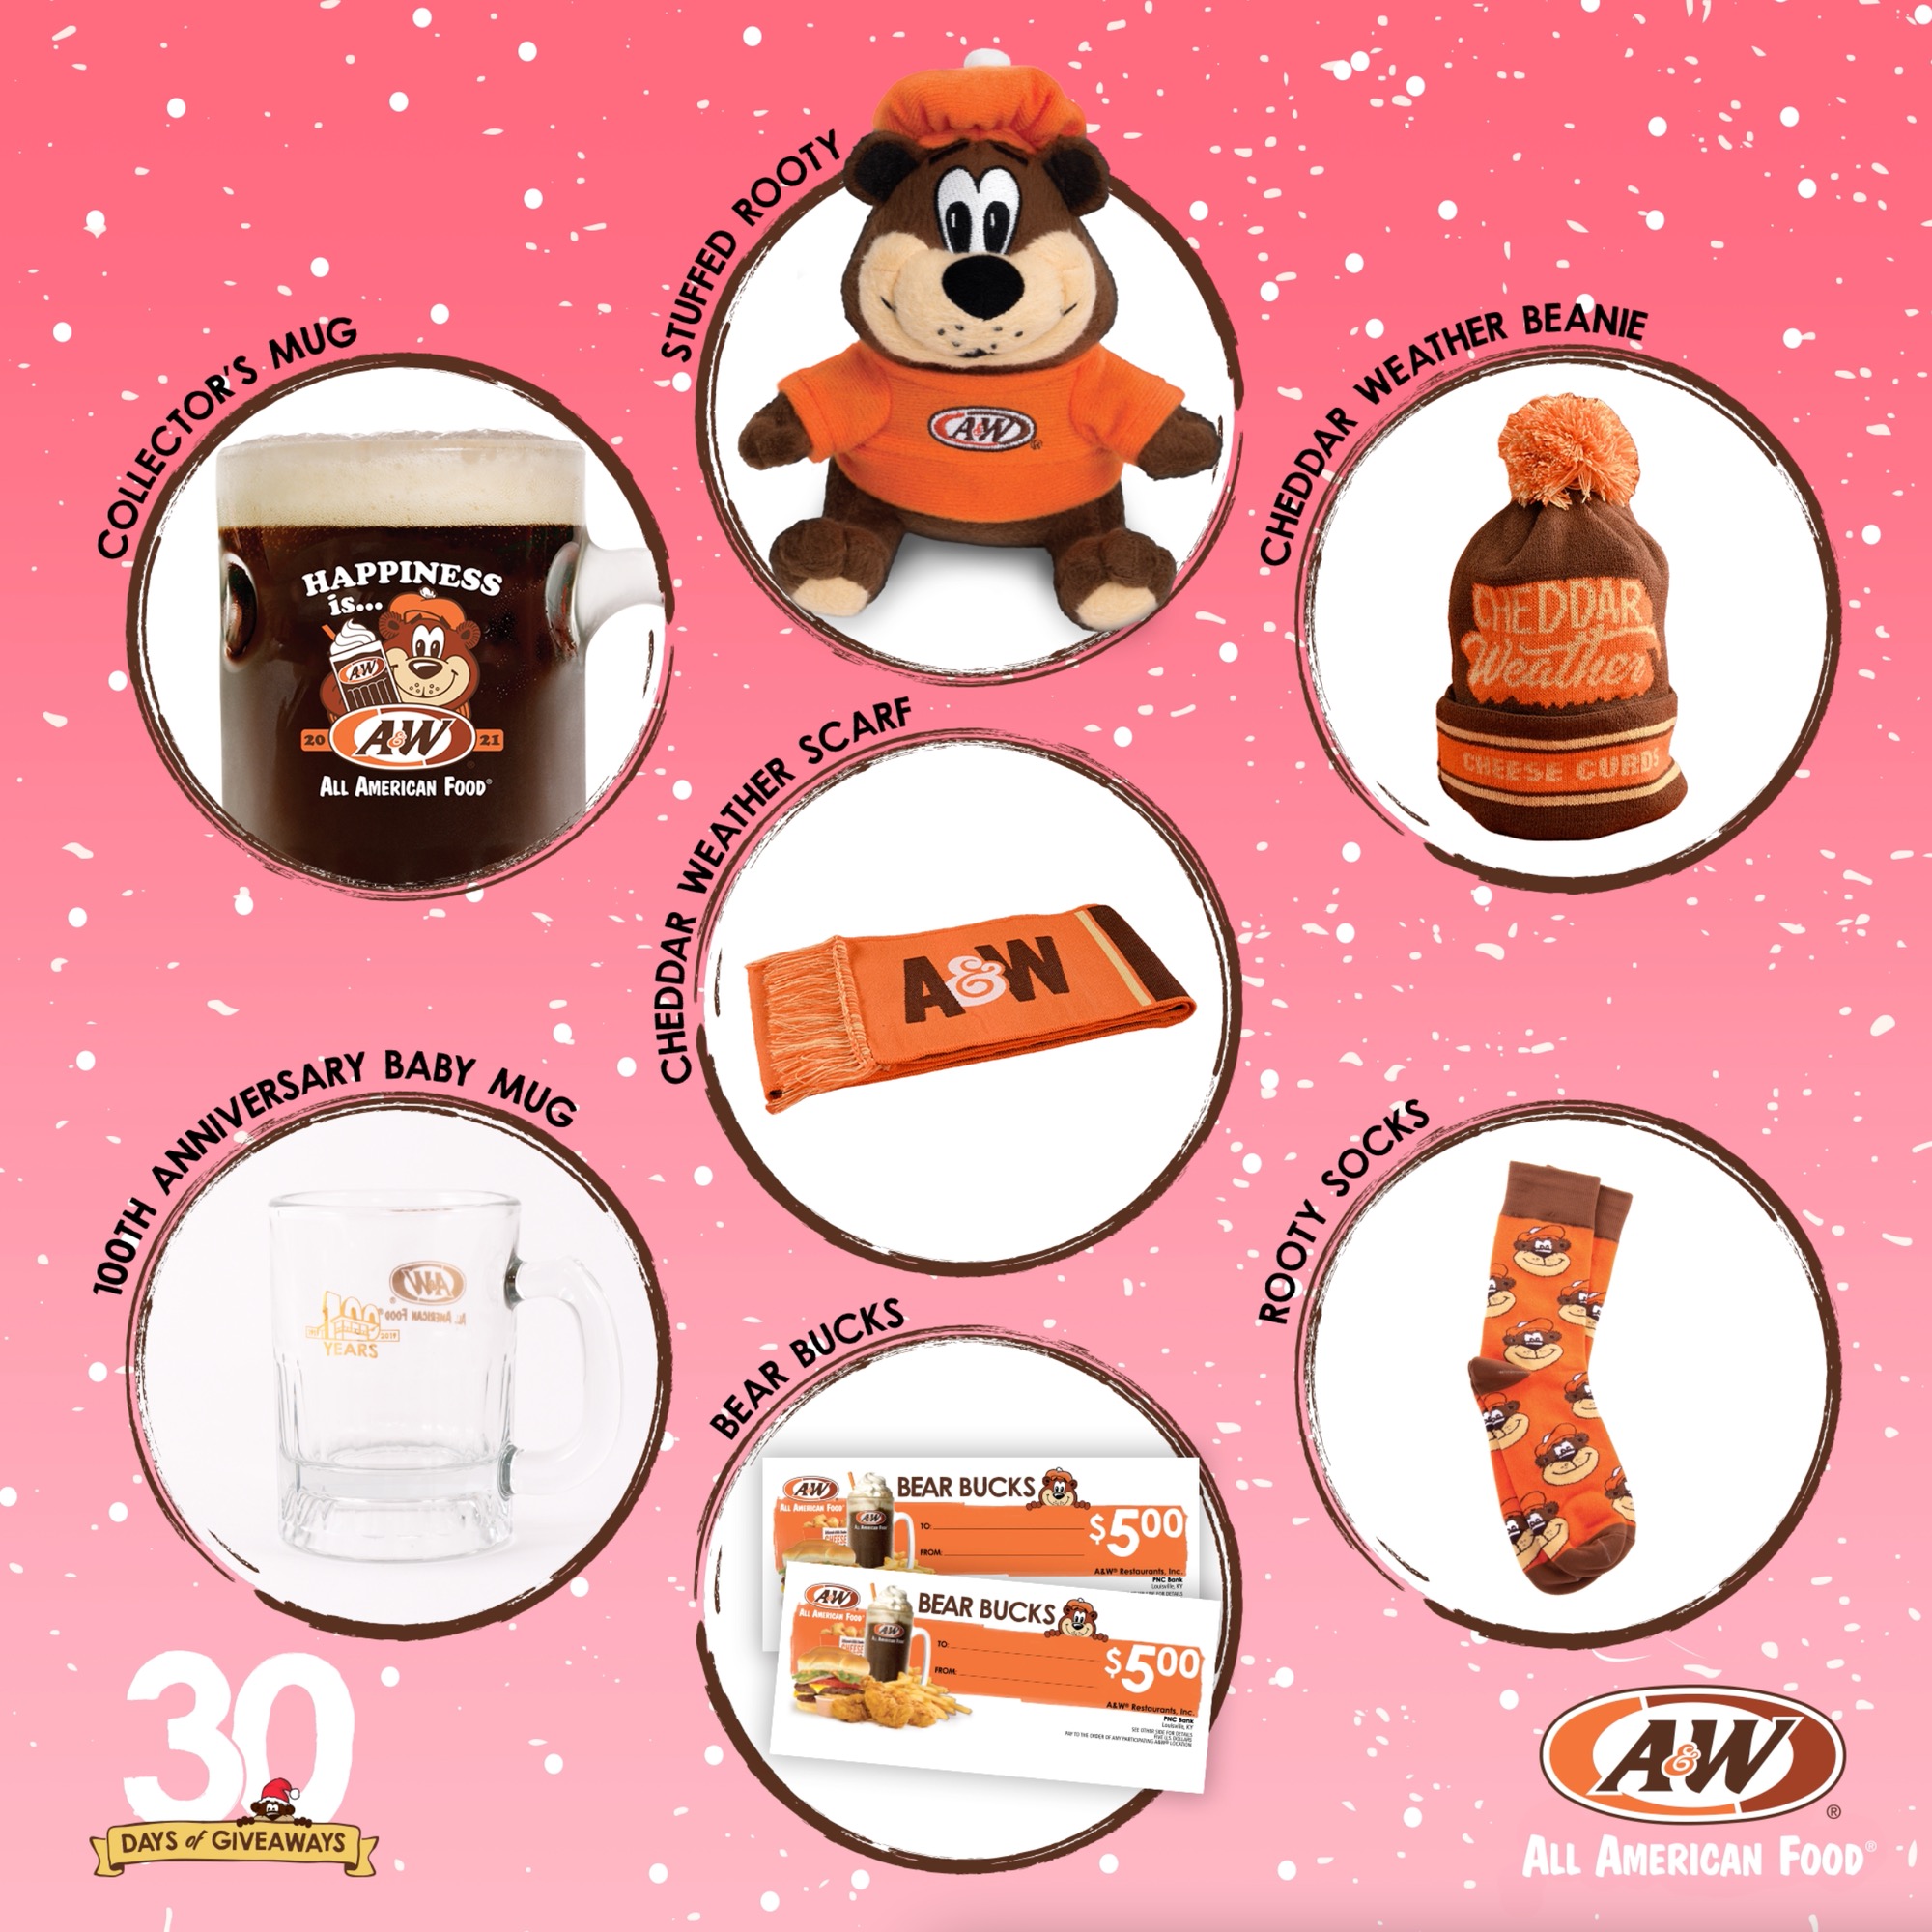 30 Days of Giveaways Prize Pack Four featuring Stuffed Rooty, 100th Anniversary Baby Mug, Bear Bucks, Collector's Mug, Rooty Socks, Cheddar Weather Beanie, and Cheddar Weather Scarf